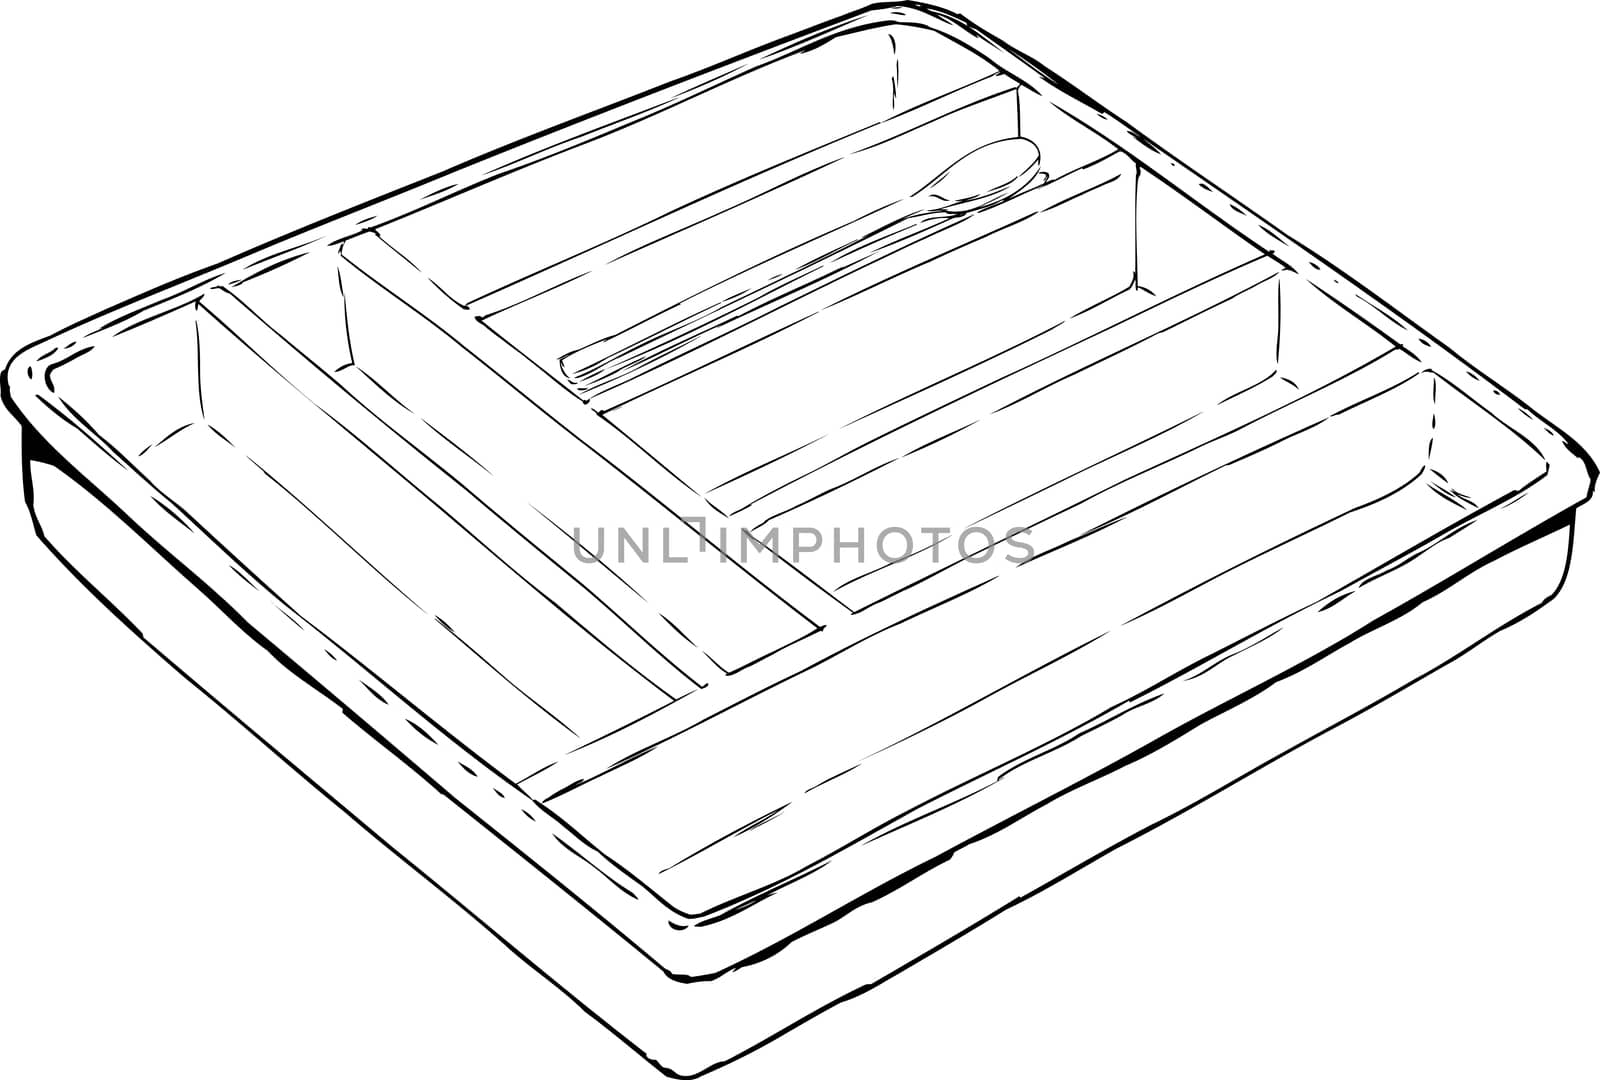 Outline of isolated rectangular cutlery tray with stack of spoons inside